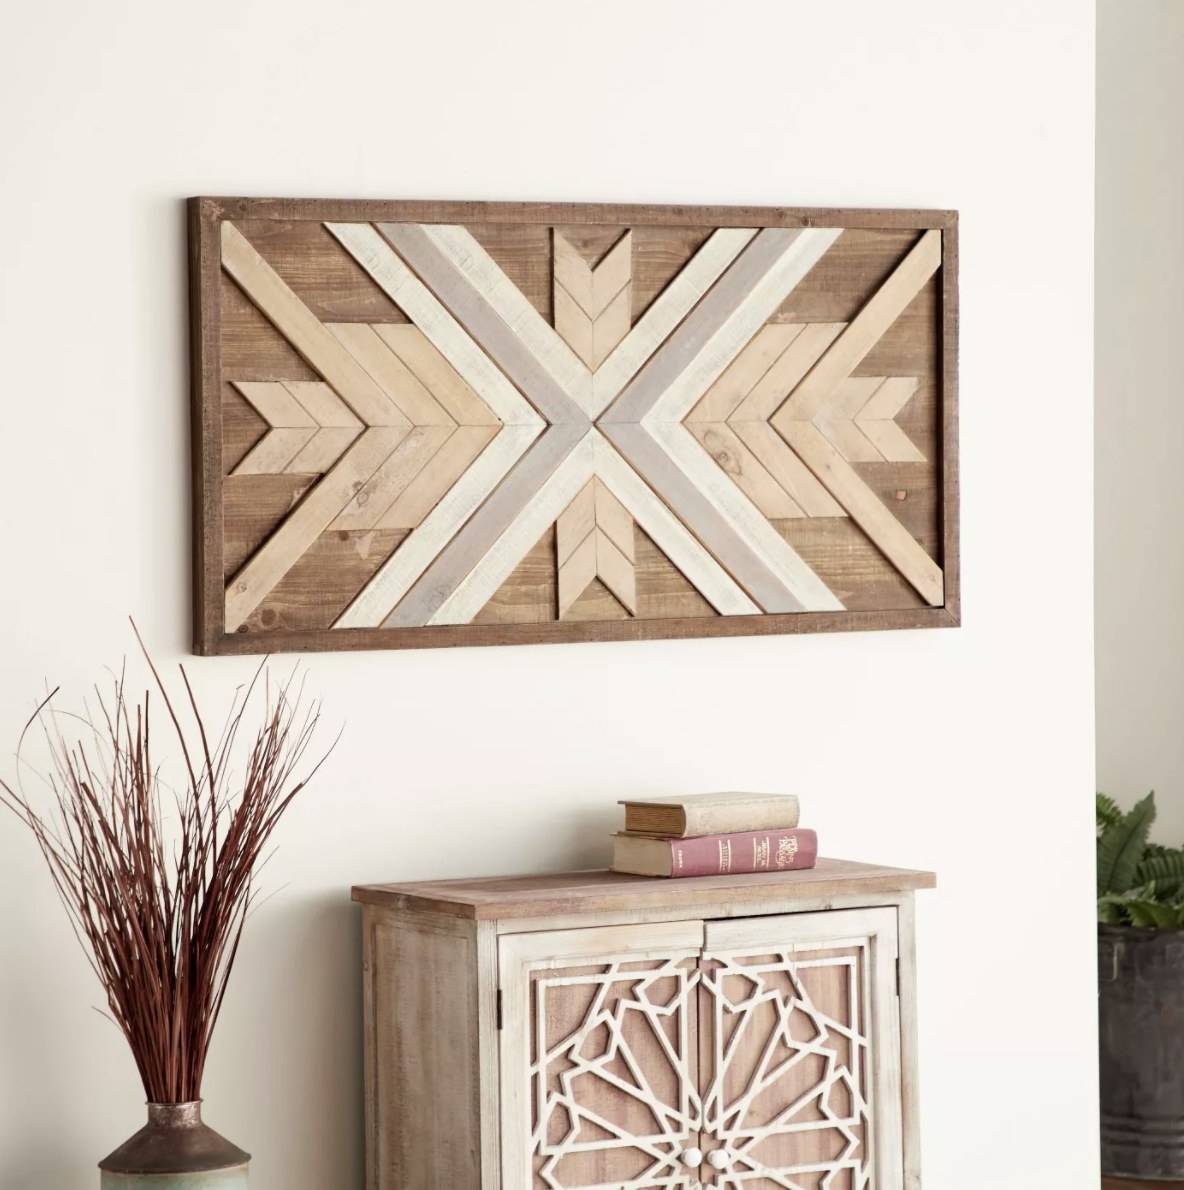 The white, gray and brown hues are in a crisscross chevron pattern in the large rectangualr wood wall decor